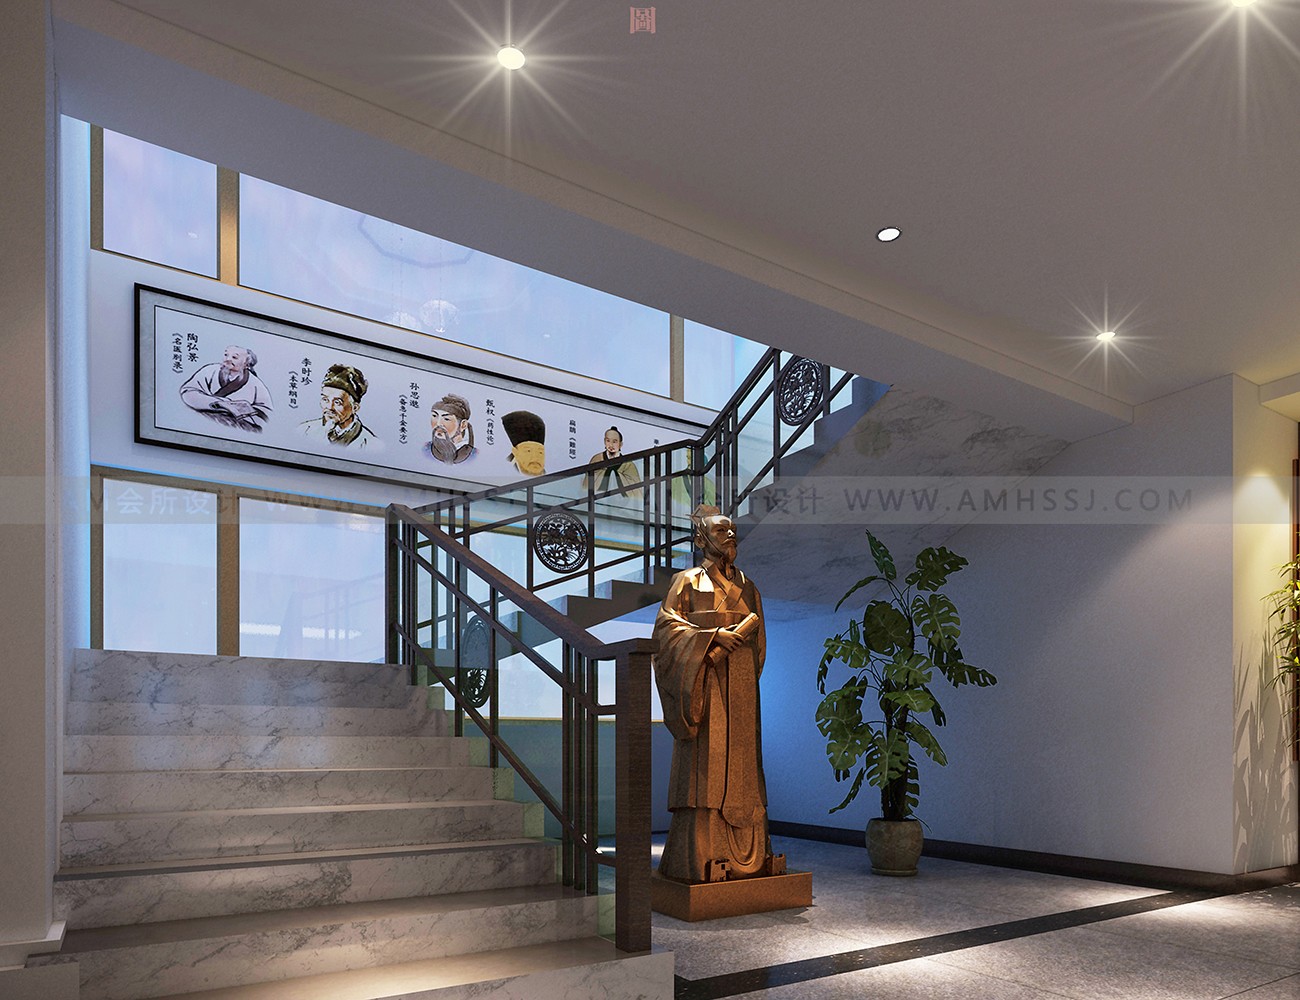 AM DESIGN | Staircase design of Harbin Traditional Chinese Medicine Cultural Center